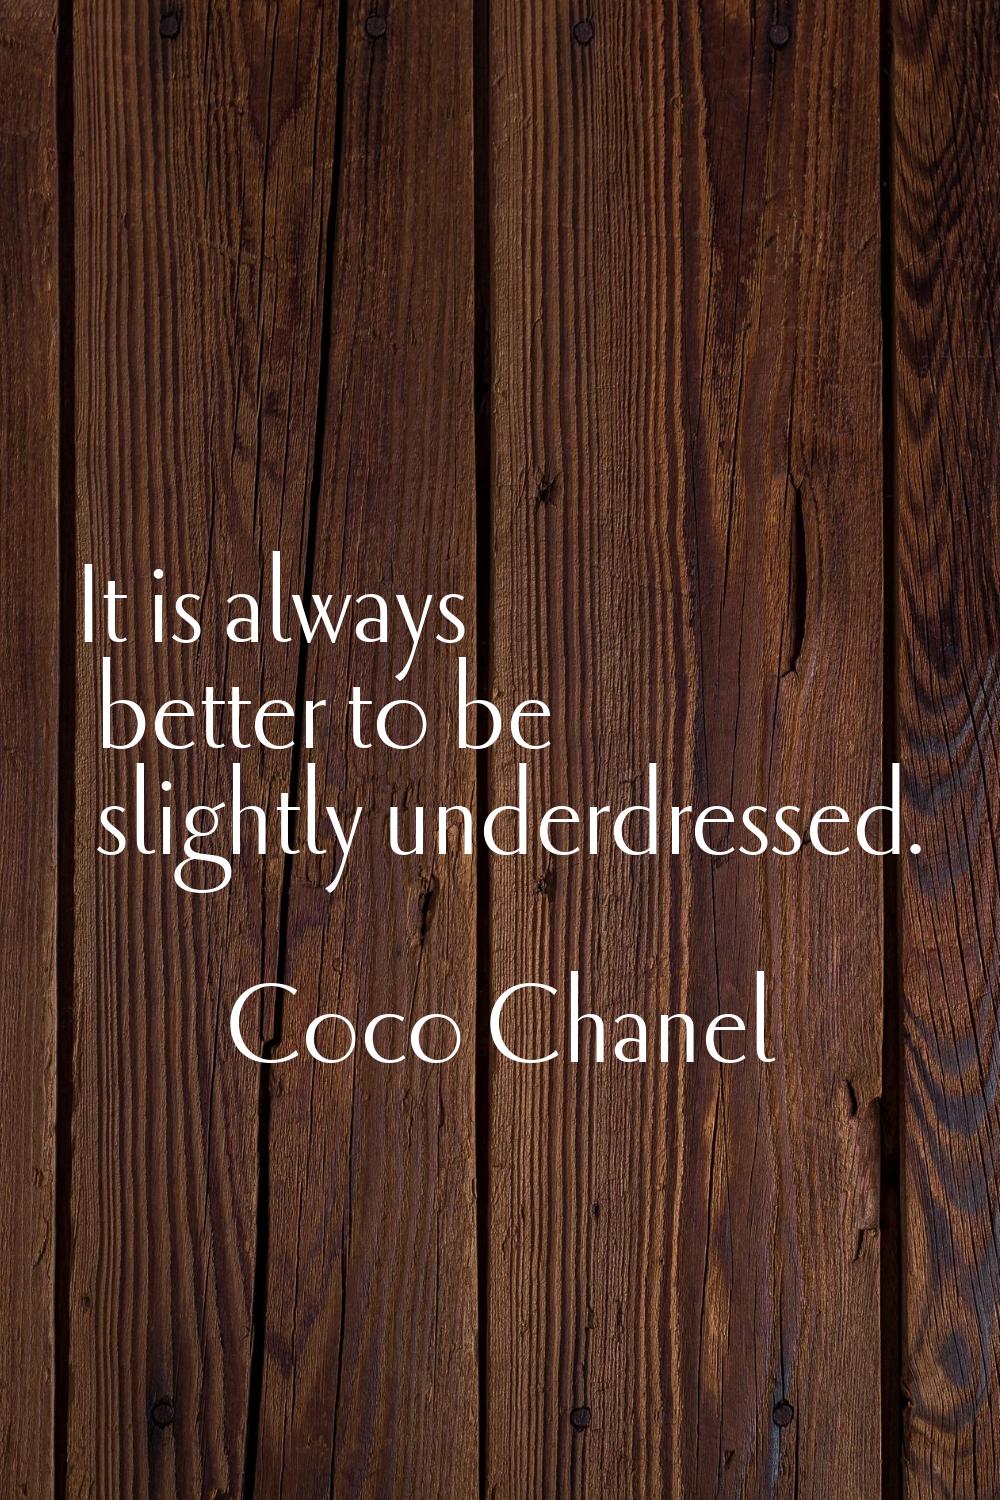 It is always better to be slightly underdressed.